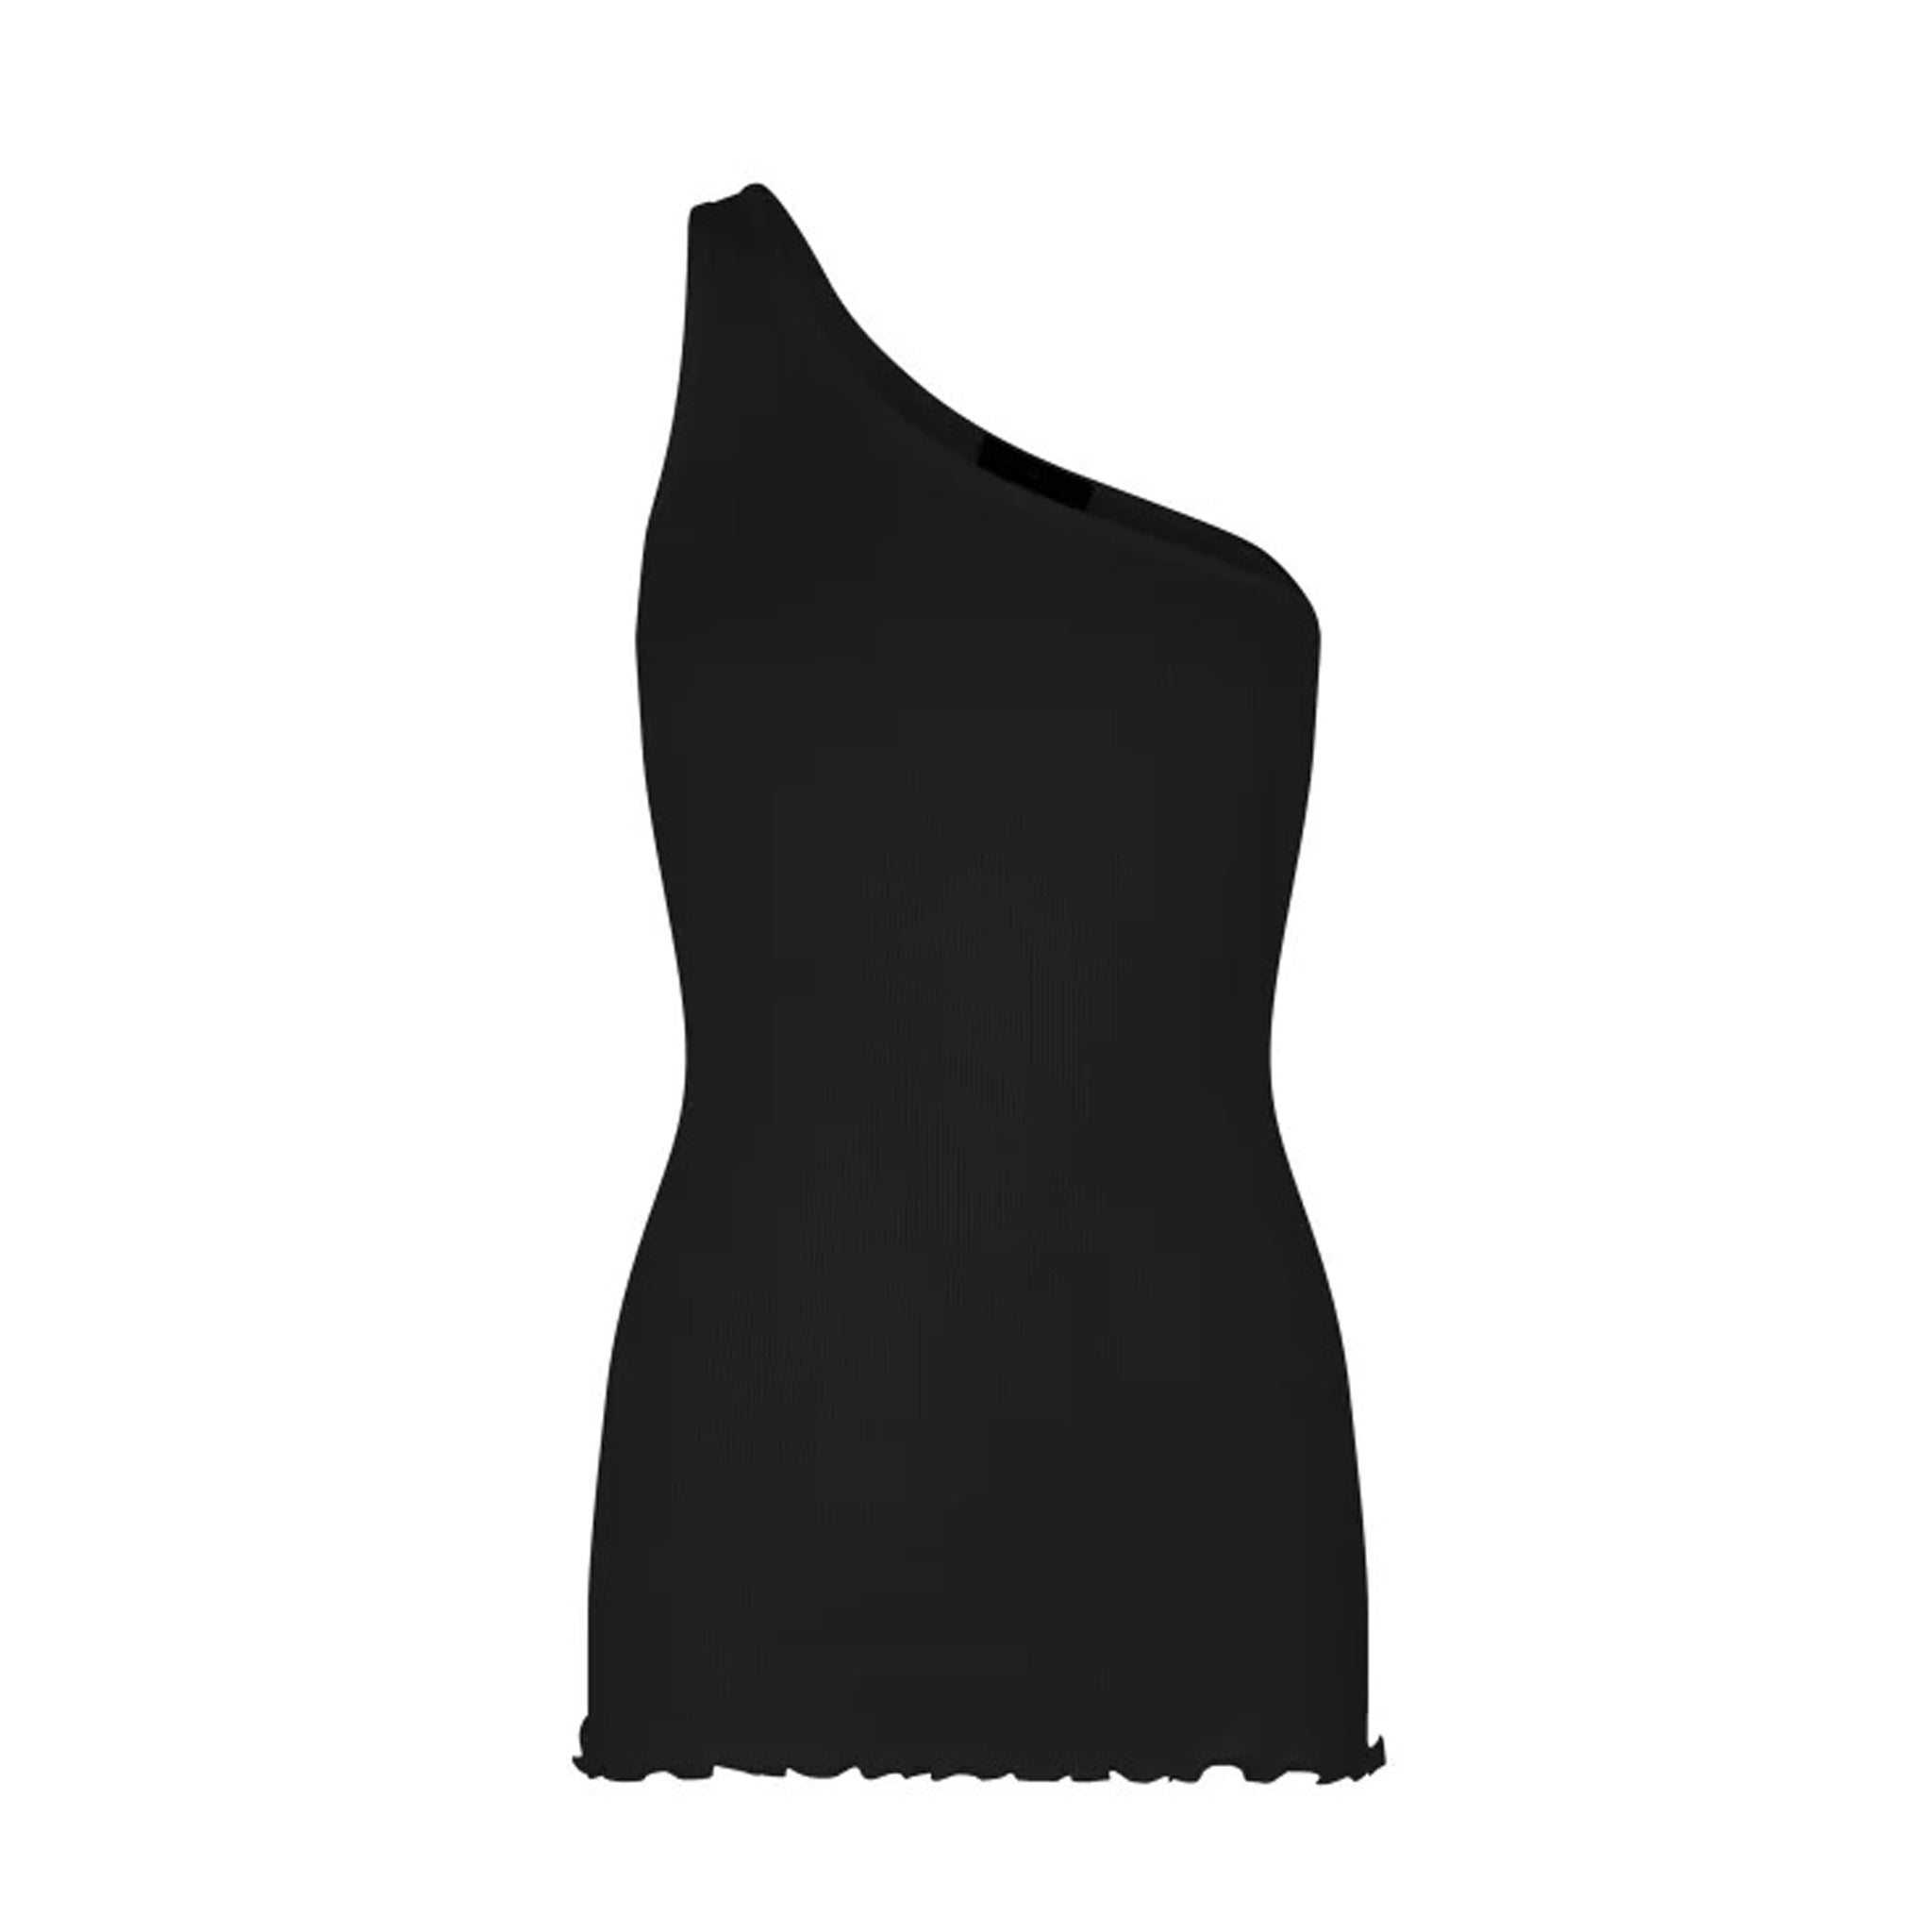 A Rosemunde organic cotton one shoulder top with ruffles, machine washable.